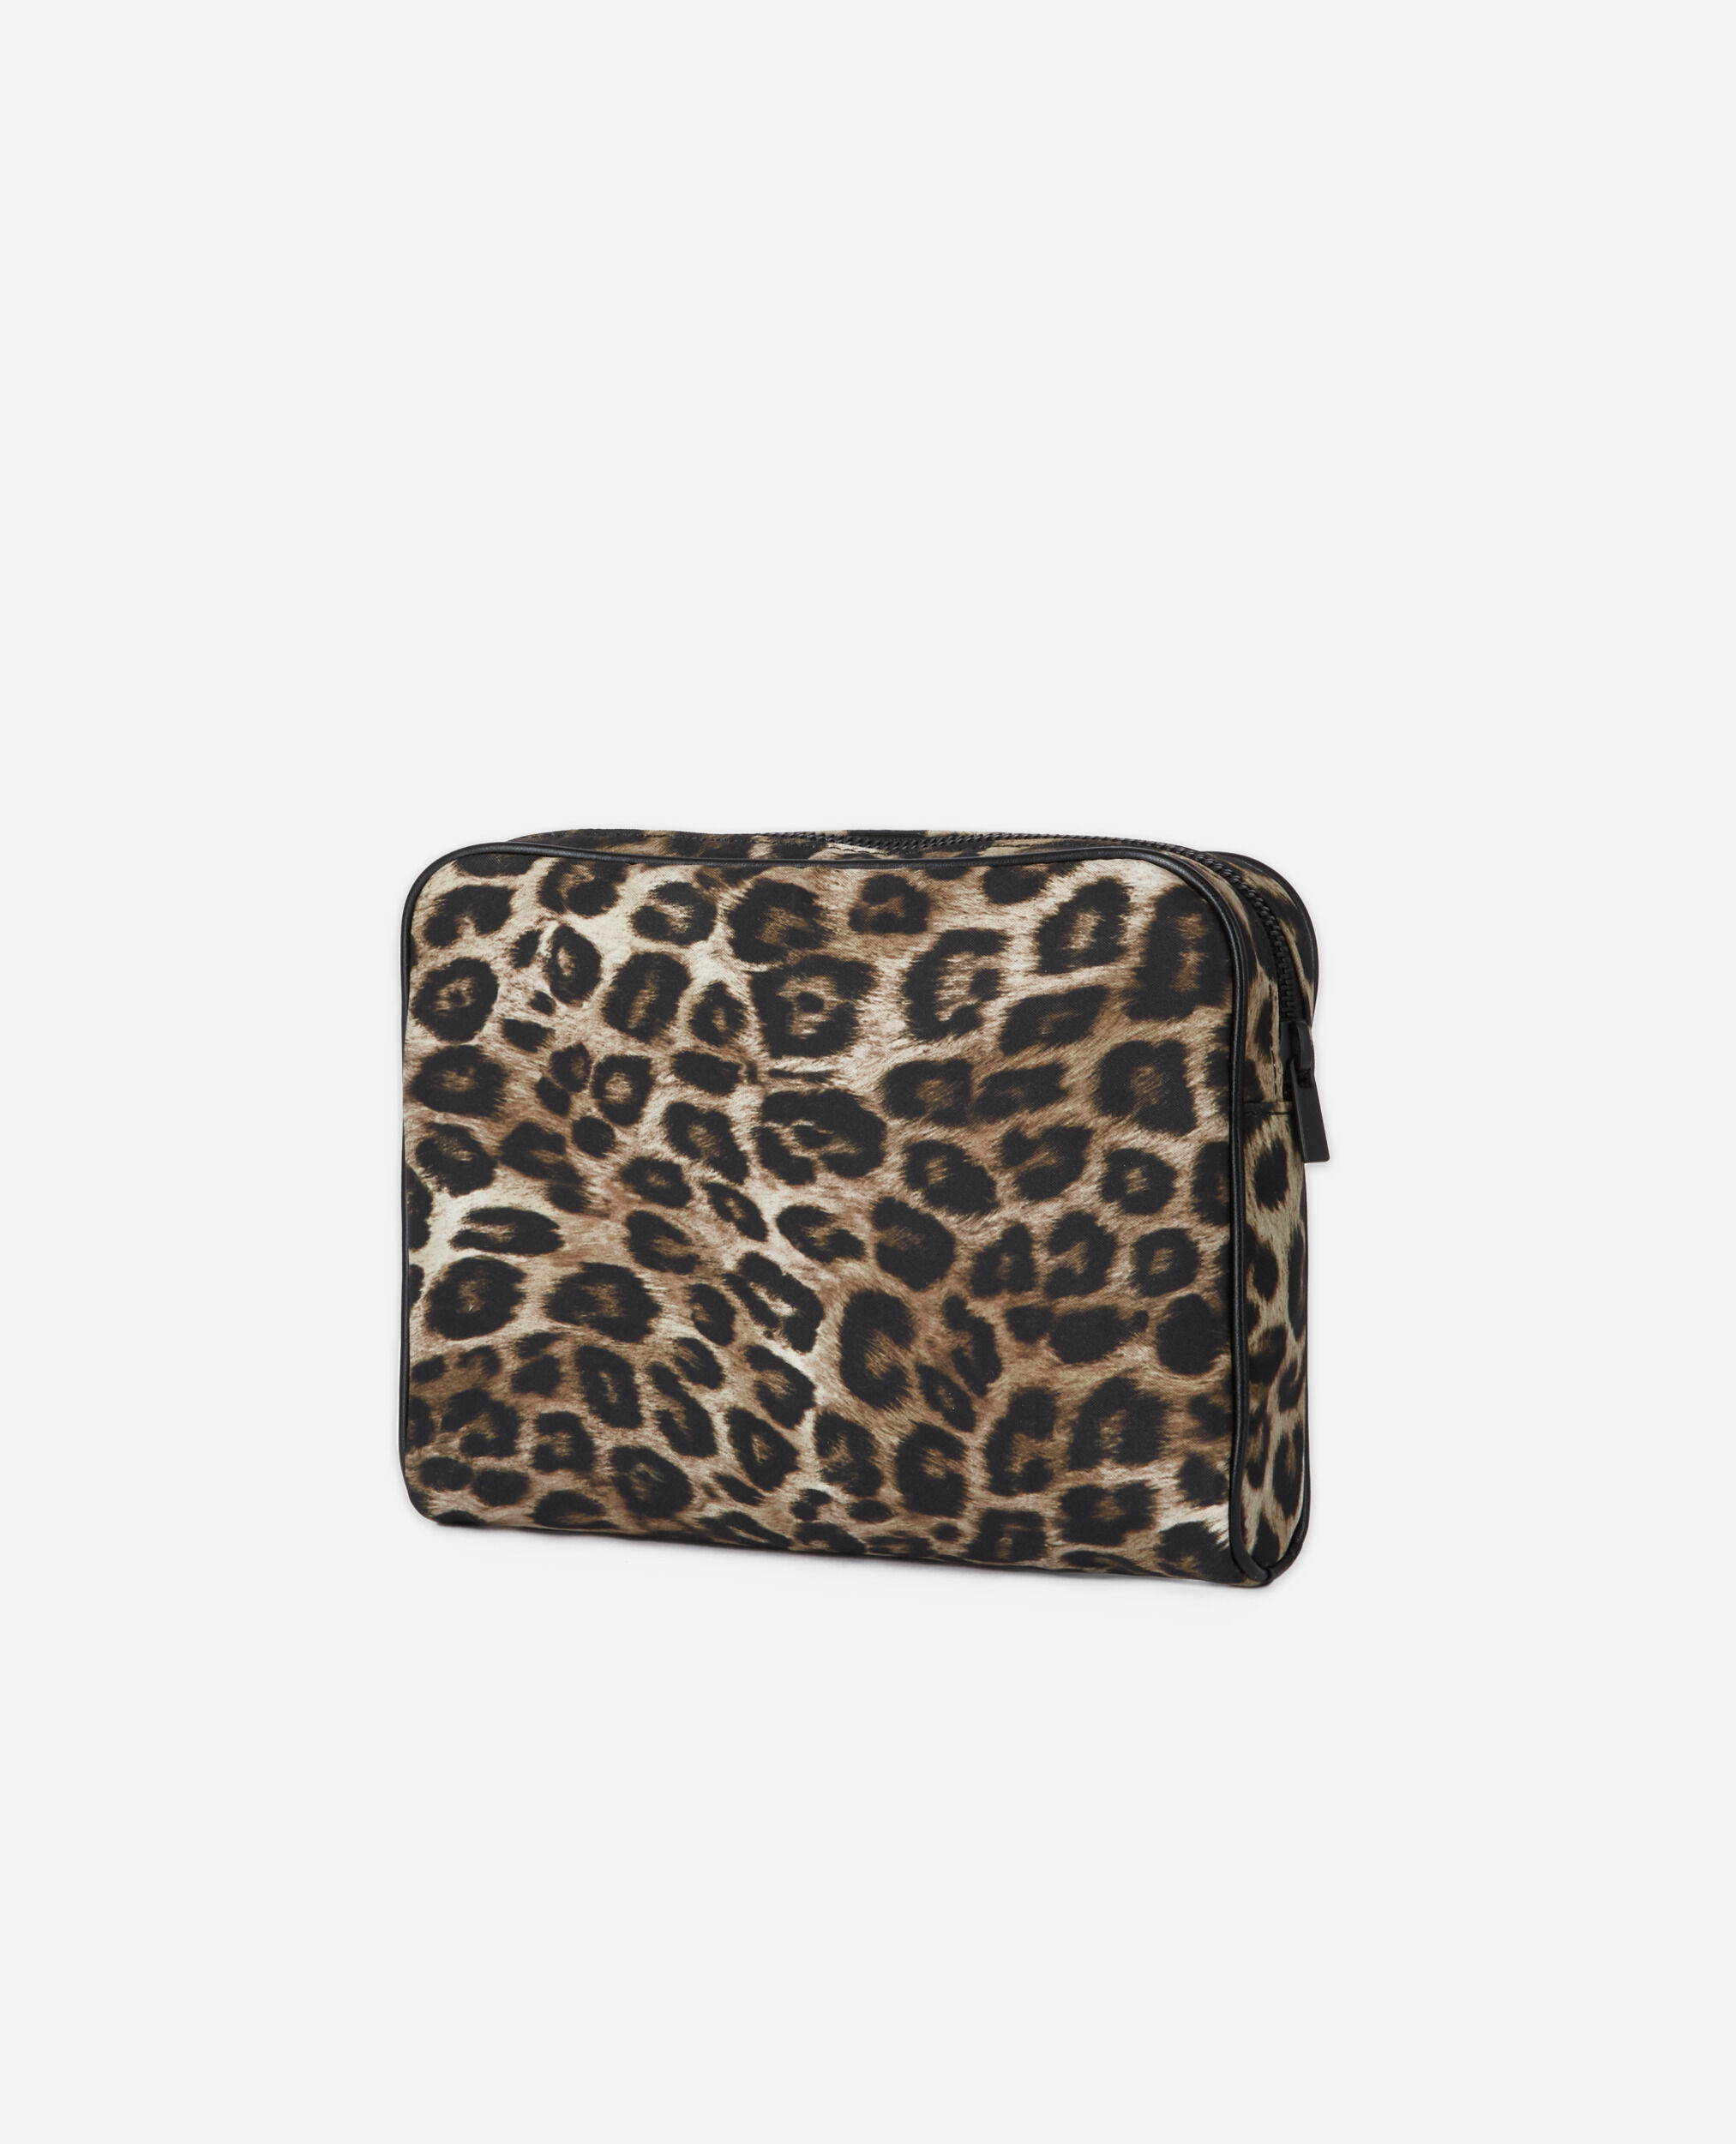 Leopard print pouch, LEOPARD, hi-res image number null